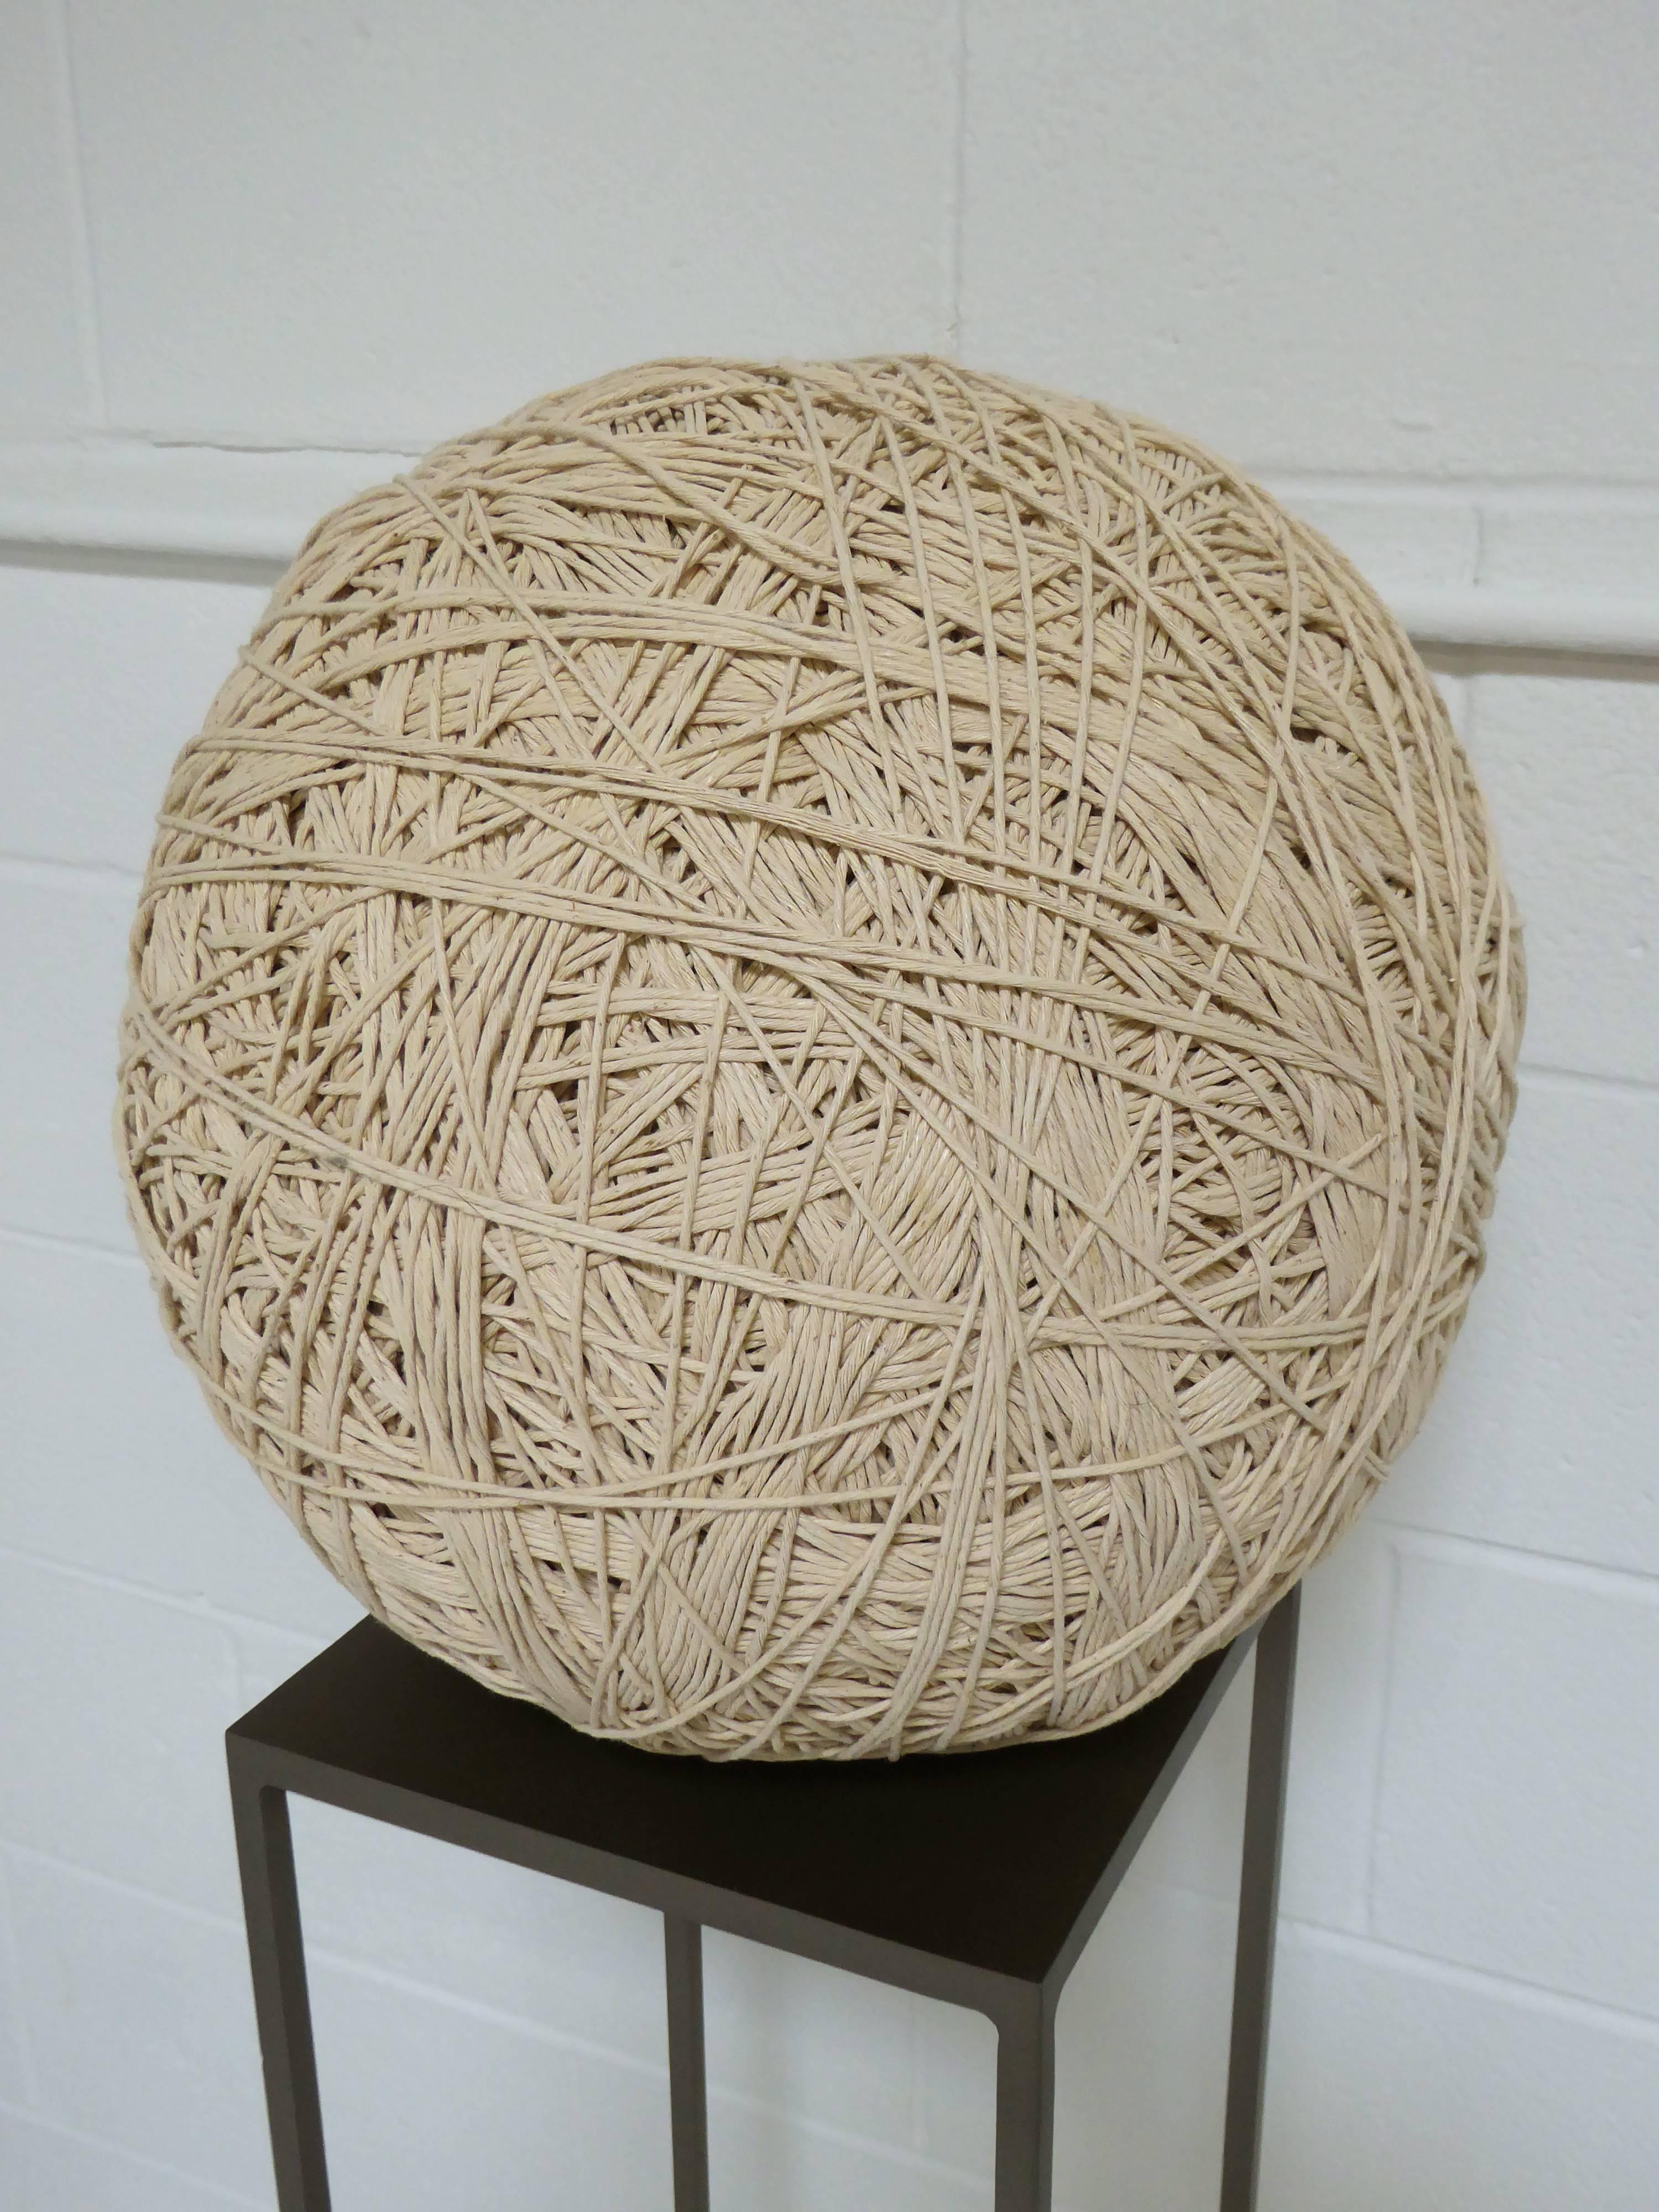 Monumental Primitive cotton twine ball sculpture on steel framed pedestal. Twine ball salvage from a Drygood Store in 1940s. Originally Used for tying parcels.

Ball of twine 15